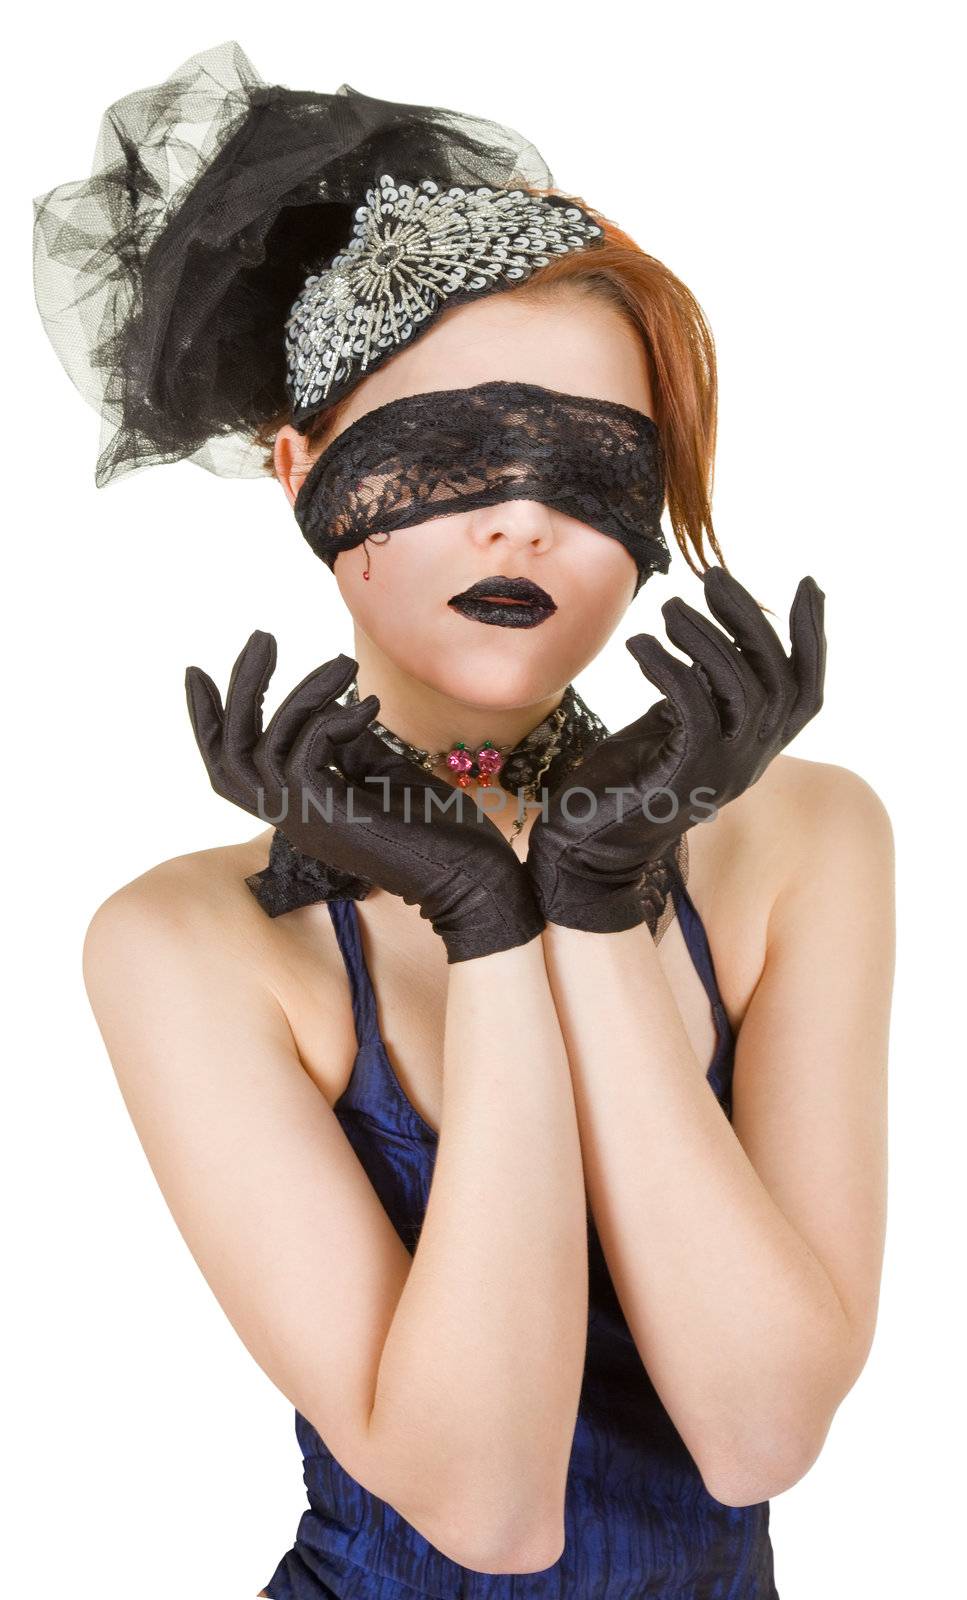 Girl blindfolded and dressed in underwear